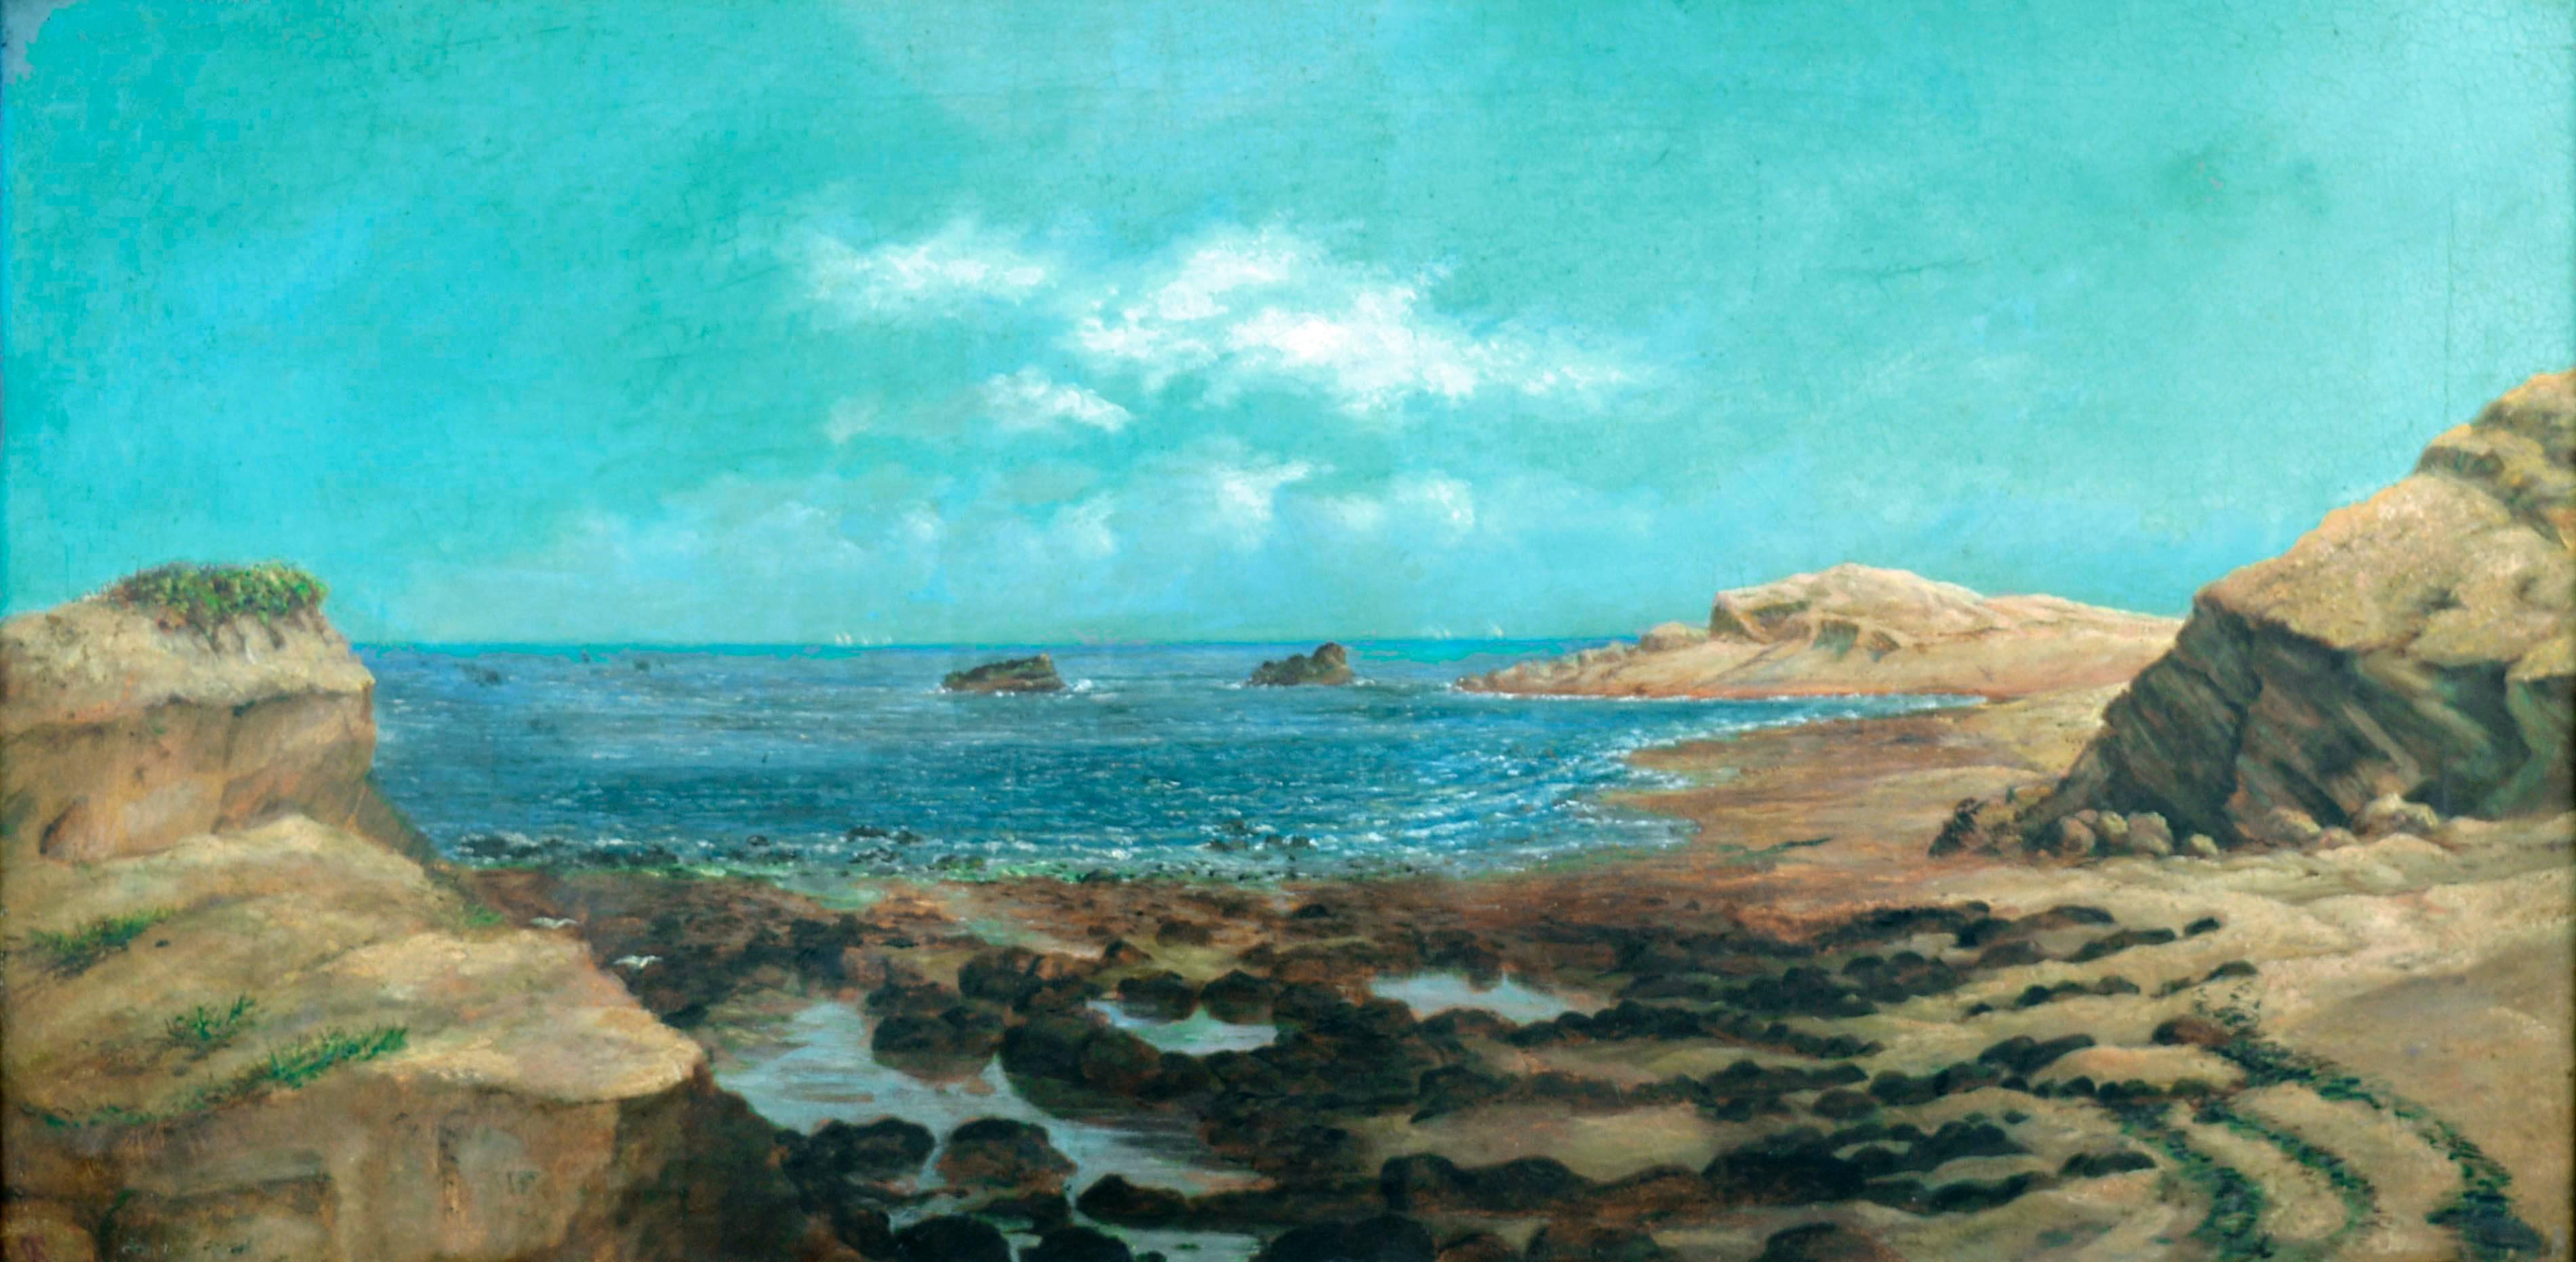 Northern California Tidal Pools - Late 19th Century Seascape - Painting by Frederick Schafer